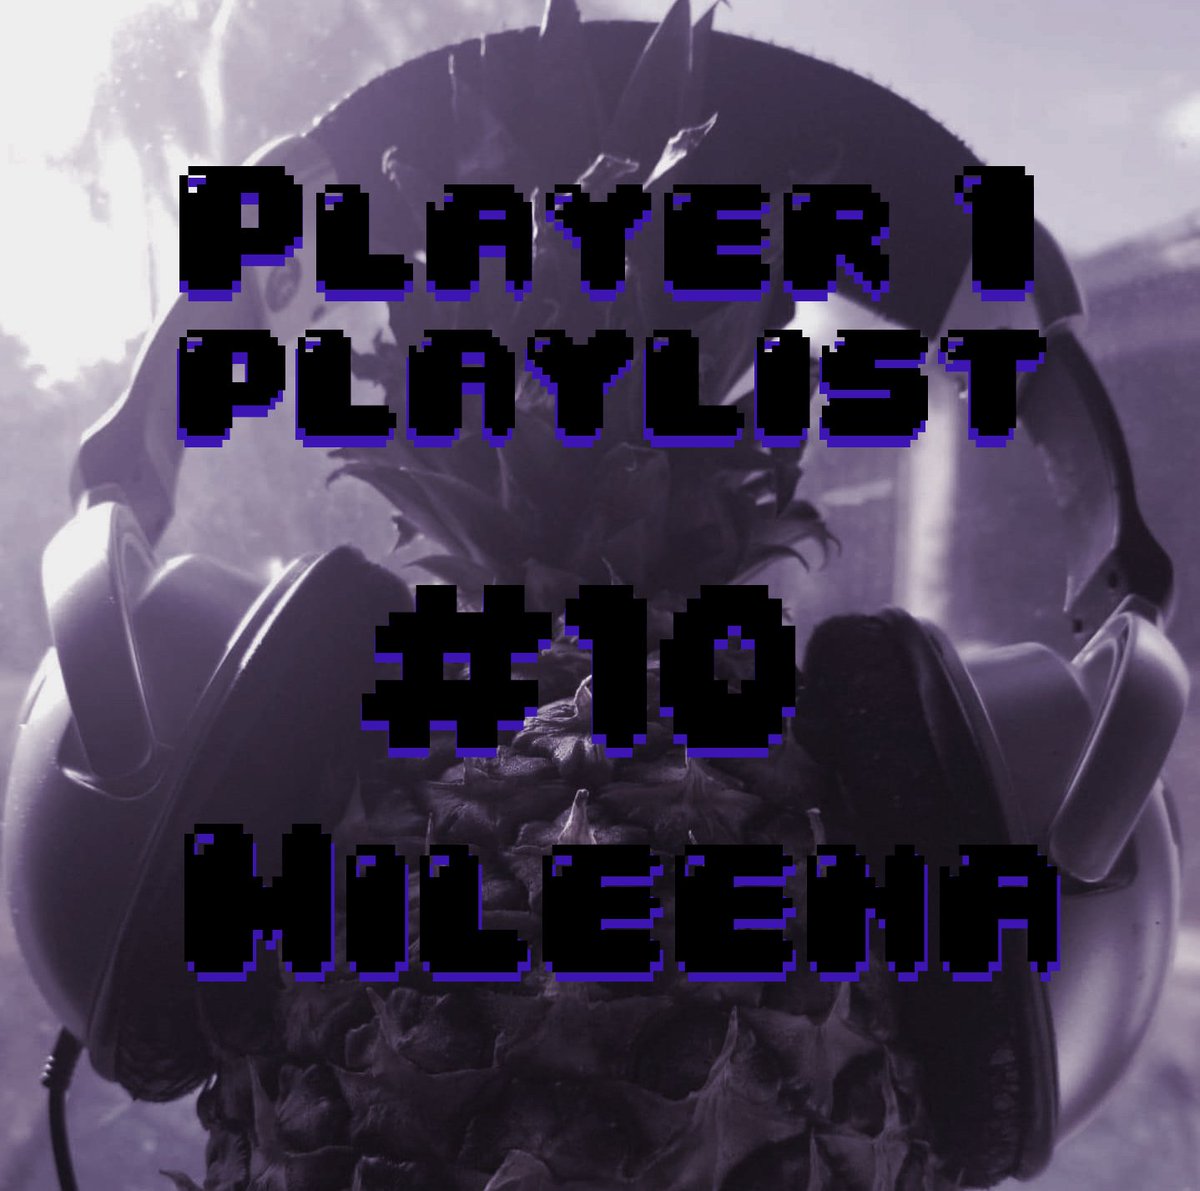 Mileena inspires a BRUTAL musical melee that will FINISH any player! Tune in to the newest episode of @Player1Playlist
spotify.link/o4oEr7WDRDb